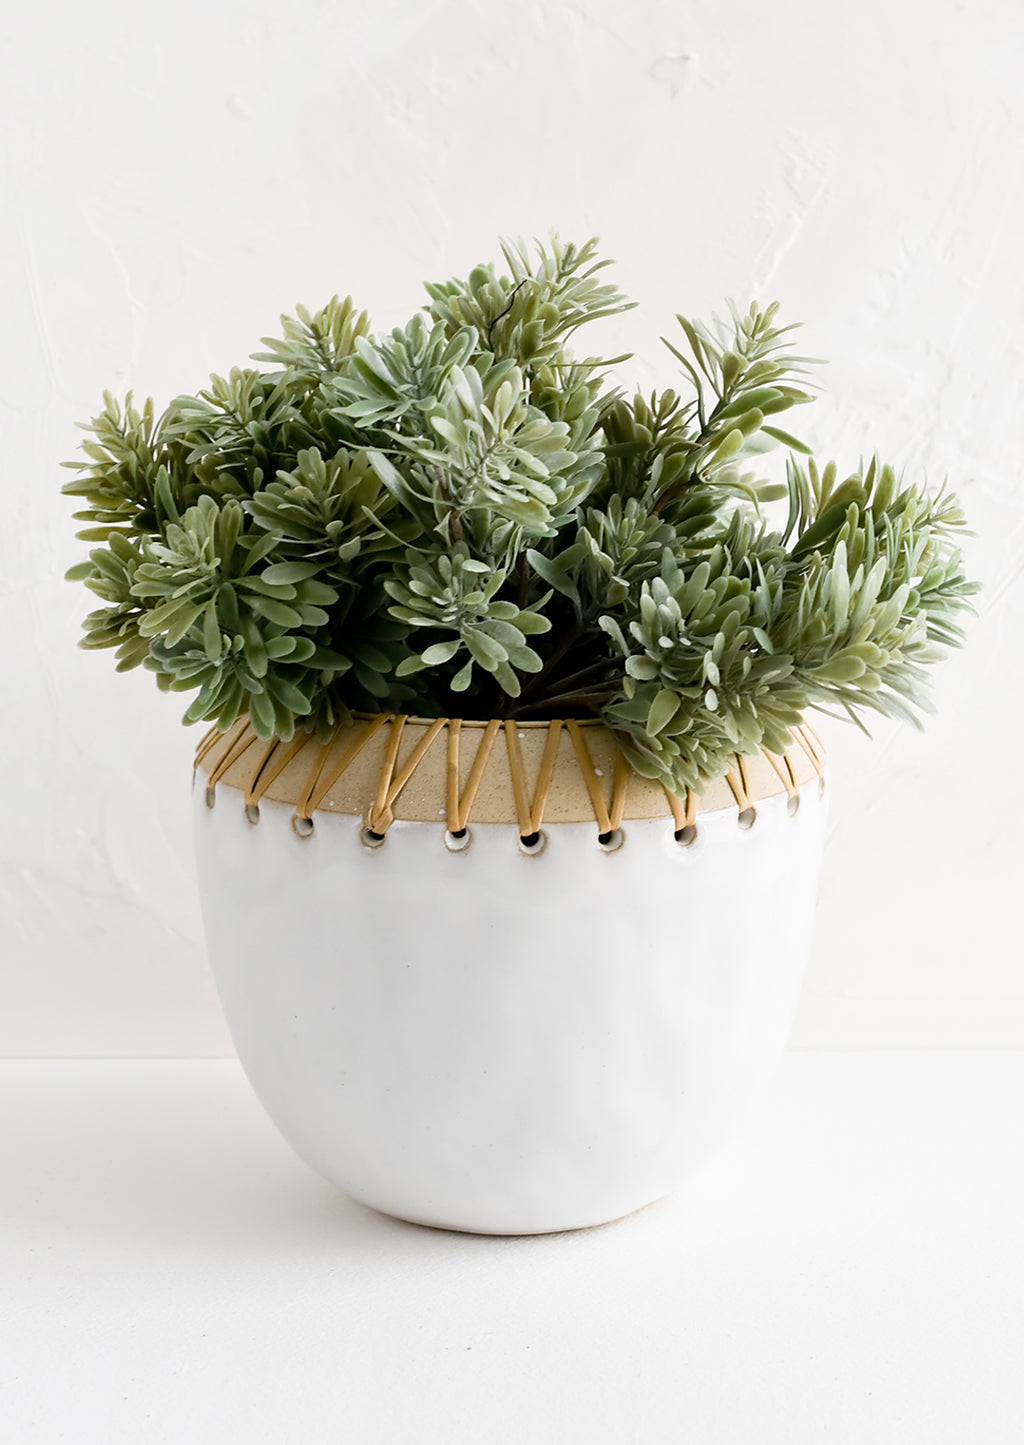 2: A white ceramic planter in round shape with rattan trim around top, with green plant inside.